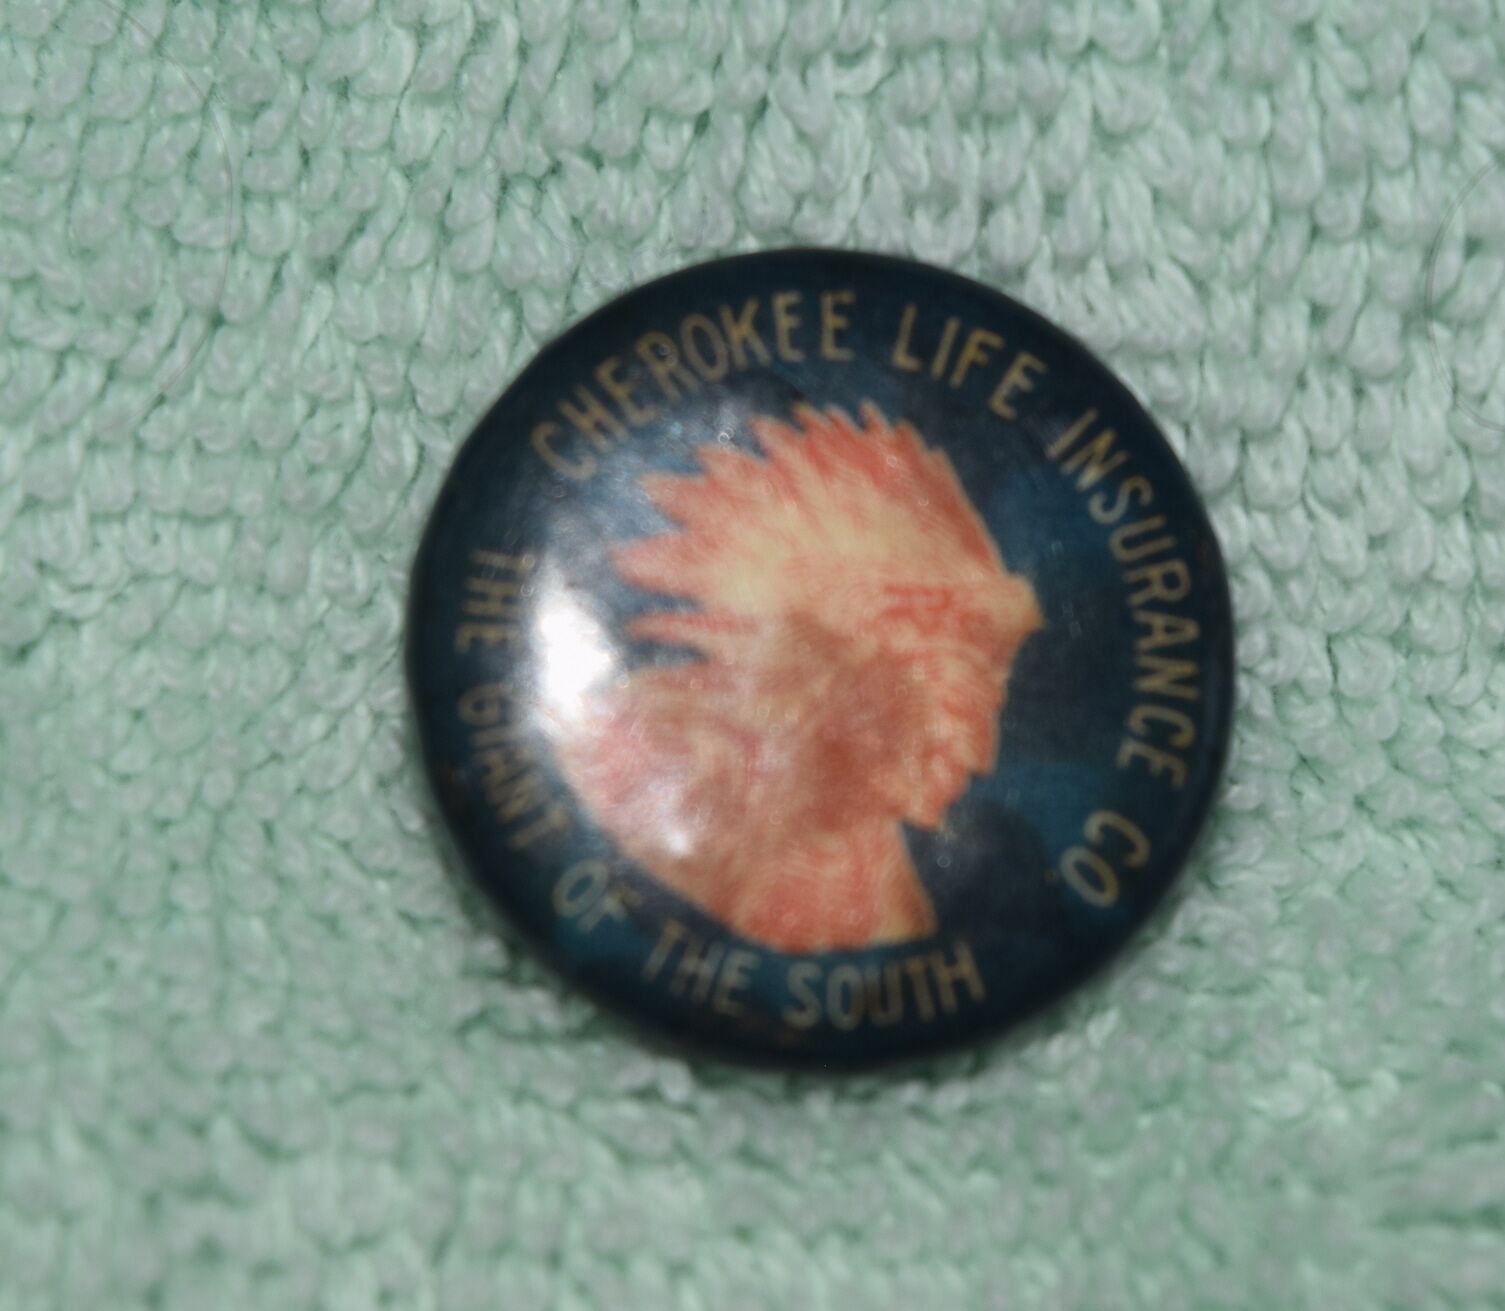 AJ-076 - Cherokee Life Insurance Co, Giant of the South, Vintage Pinback Button